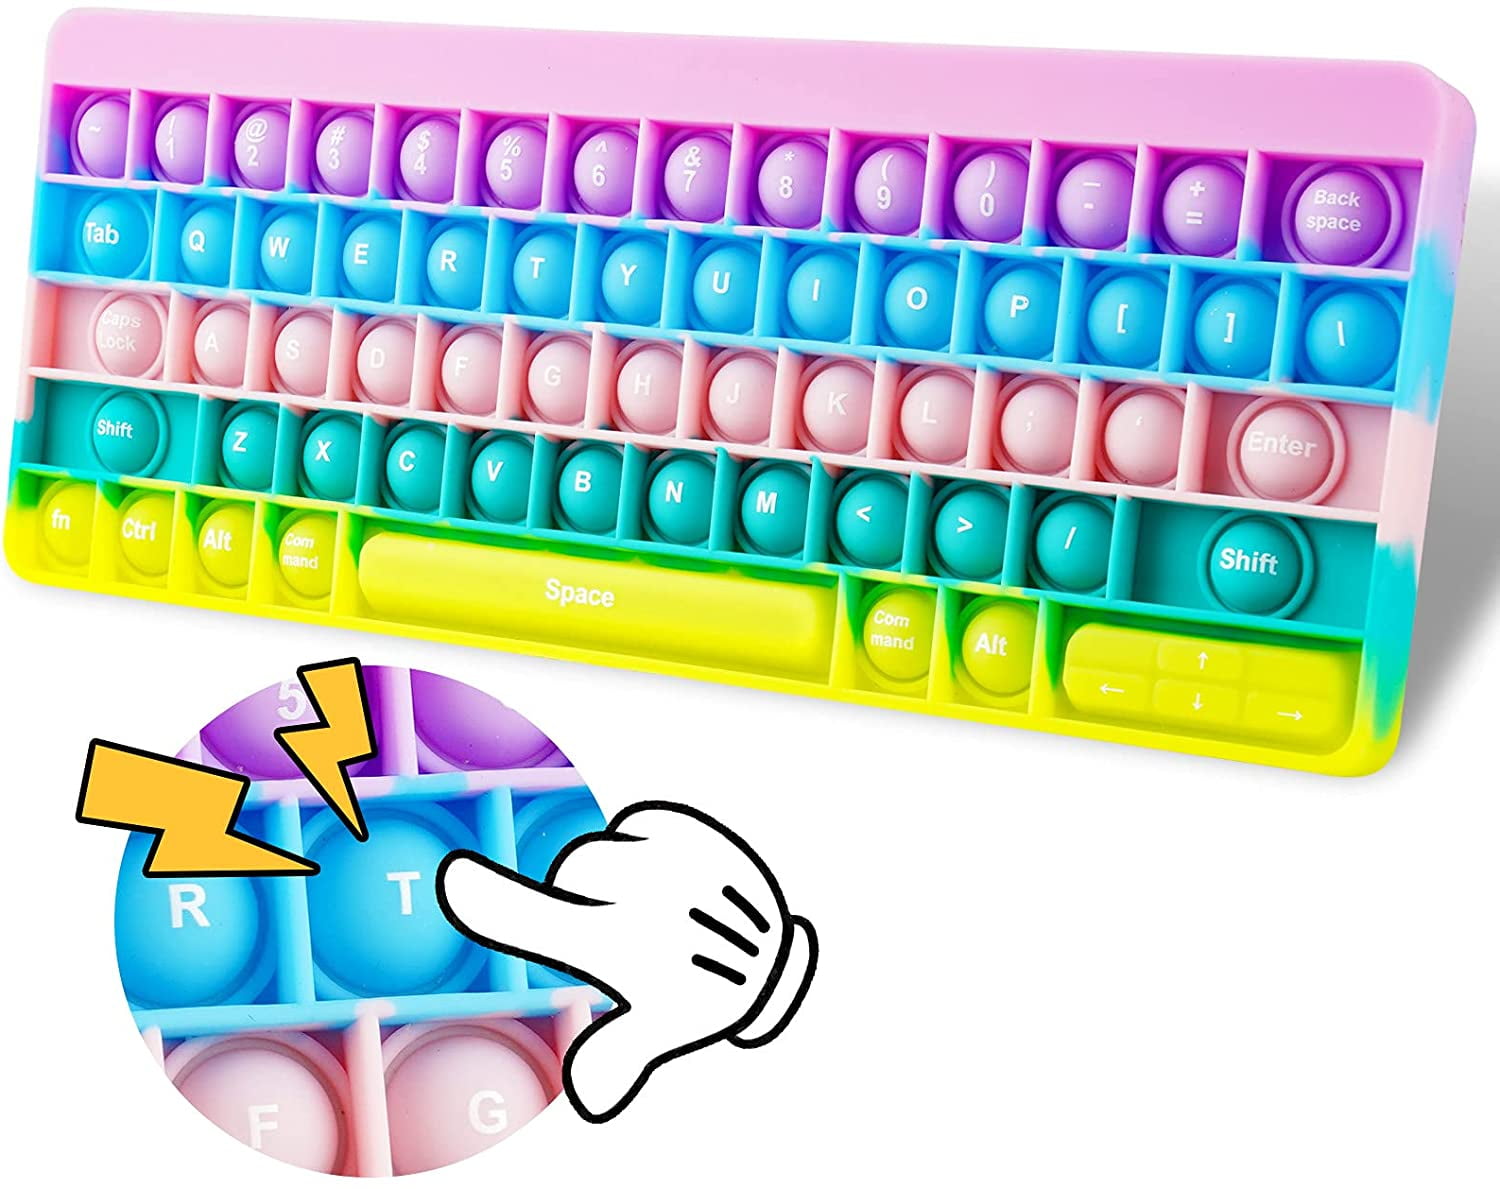 Push Popet Fidget Toys Keyboard Shaped Bubble Rainbow Silicone Stress Relief Toy 